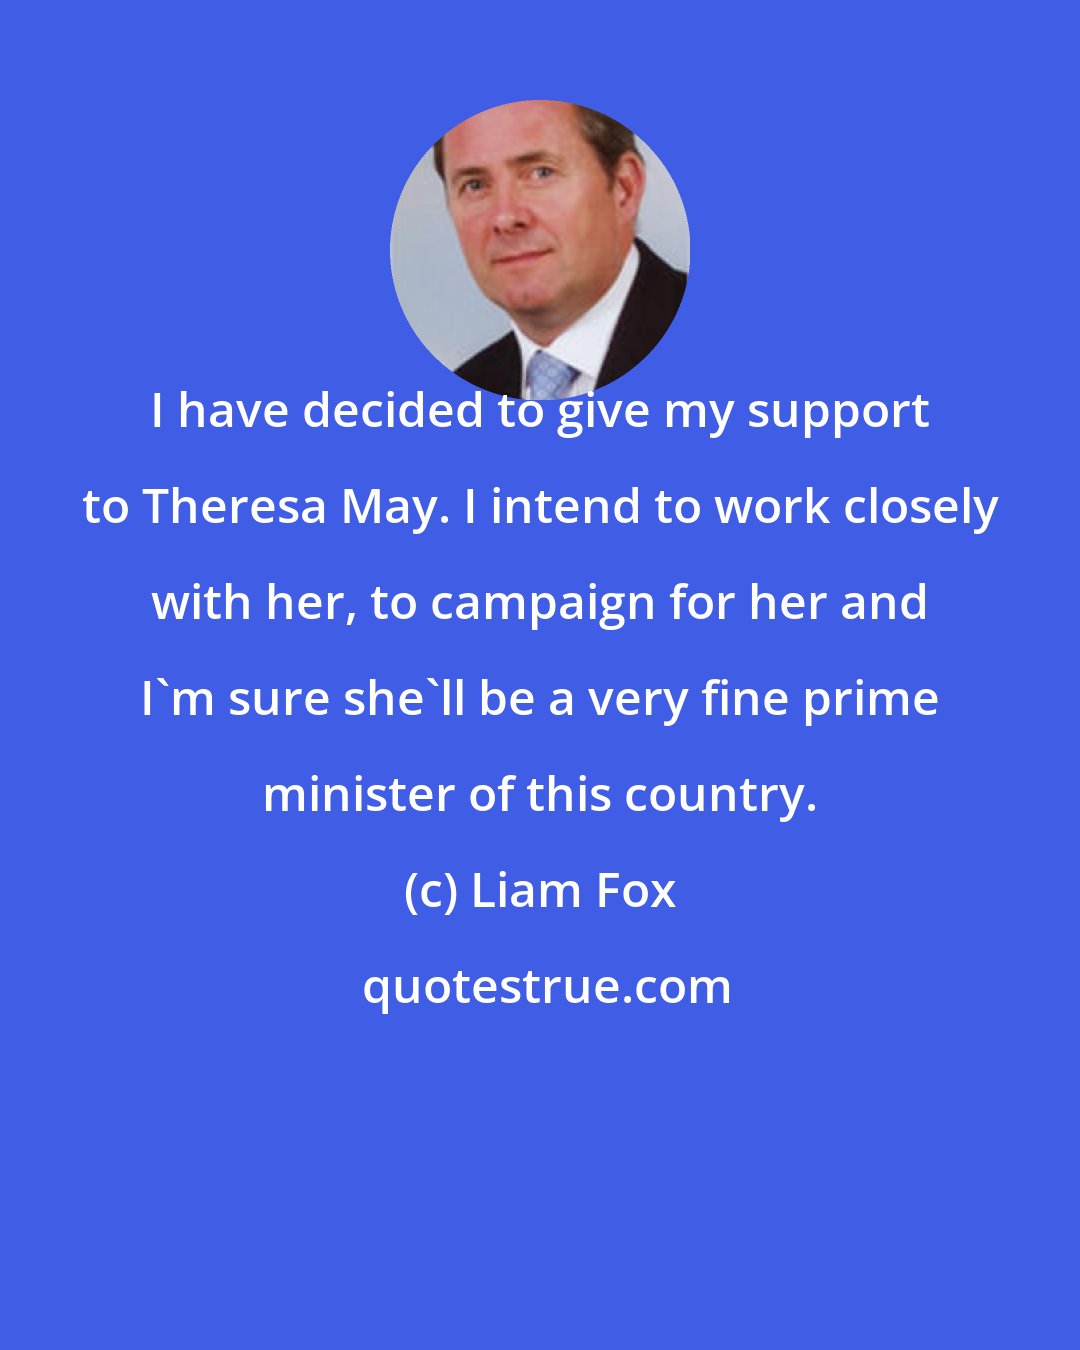 Liam Fox: I have decided to give my support to Theresa May. I intend to work closely with her, to campaign for her and I'm sure she'll be a very fine prime minister of this country.